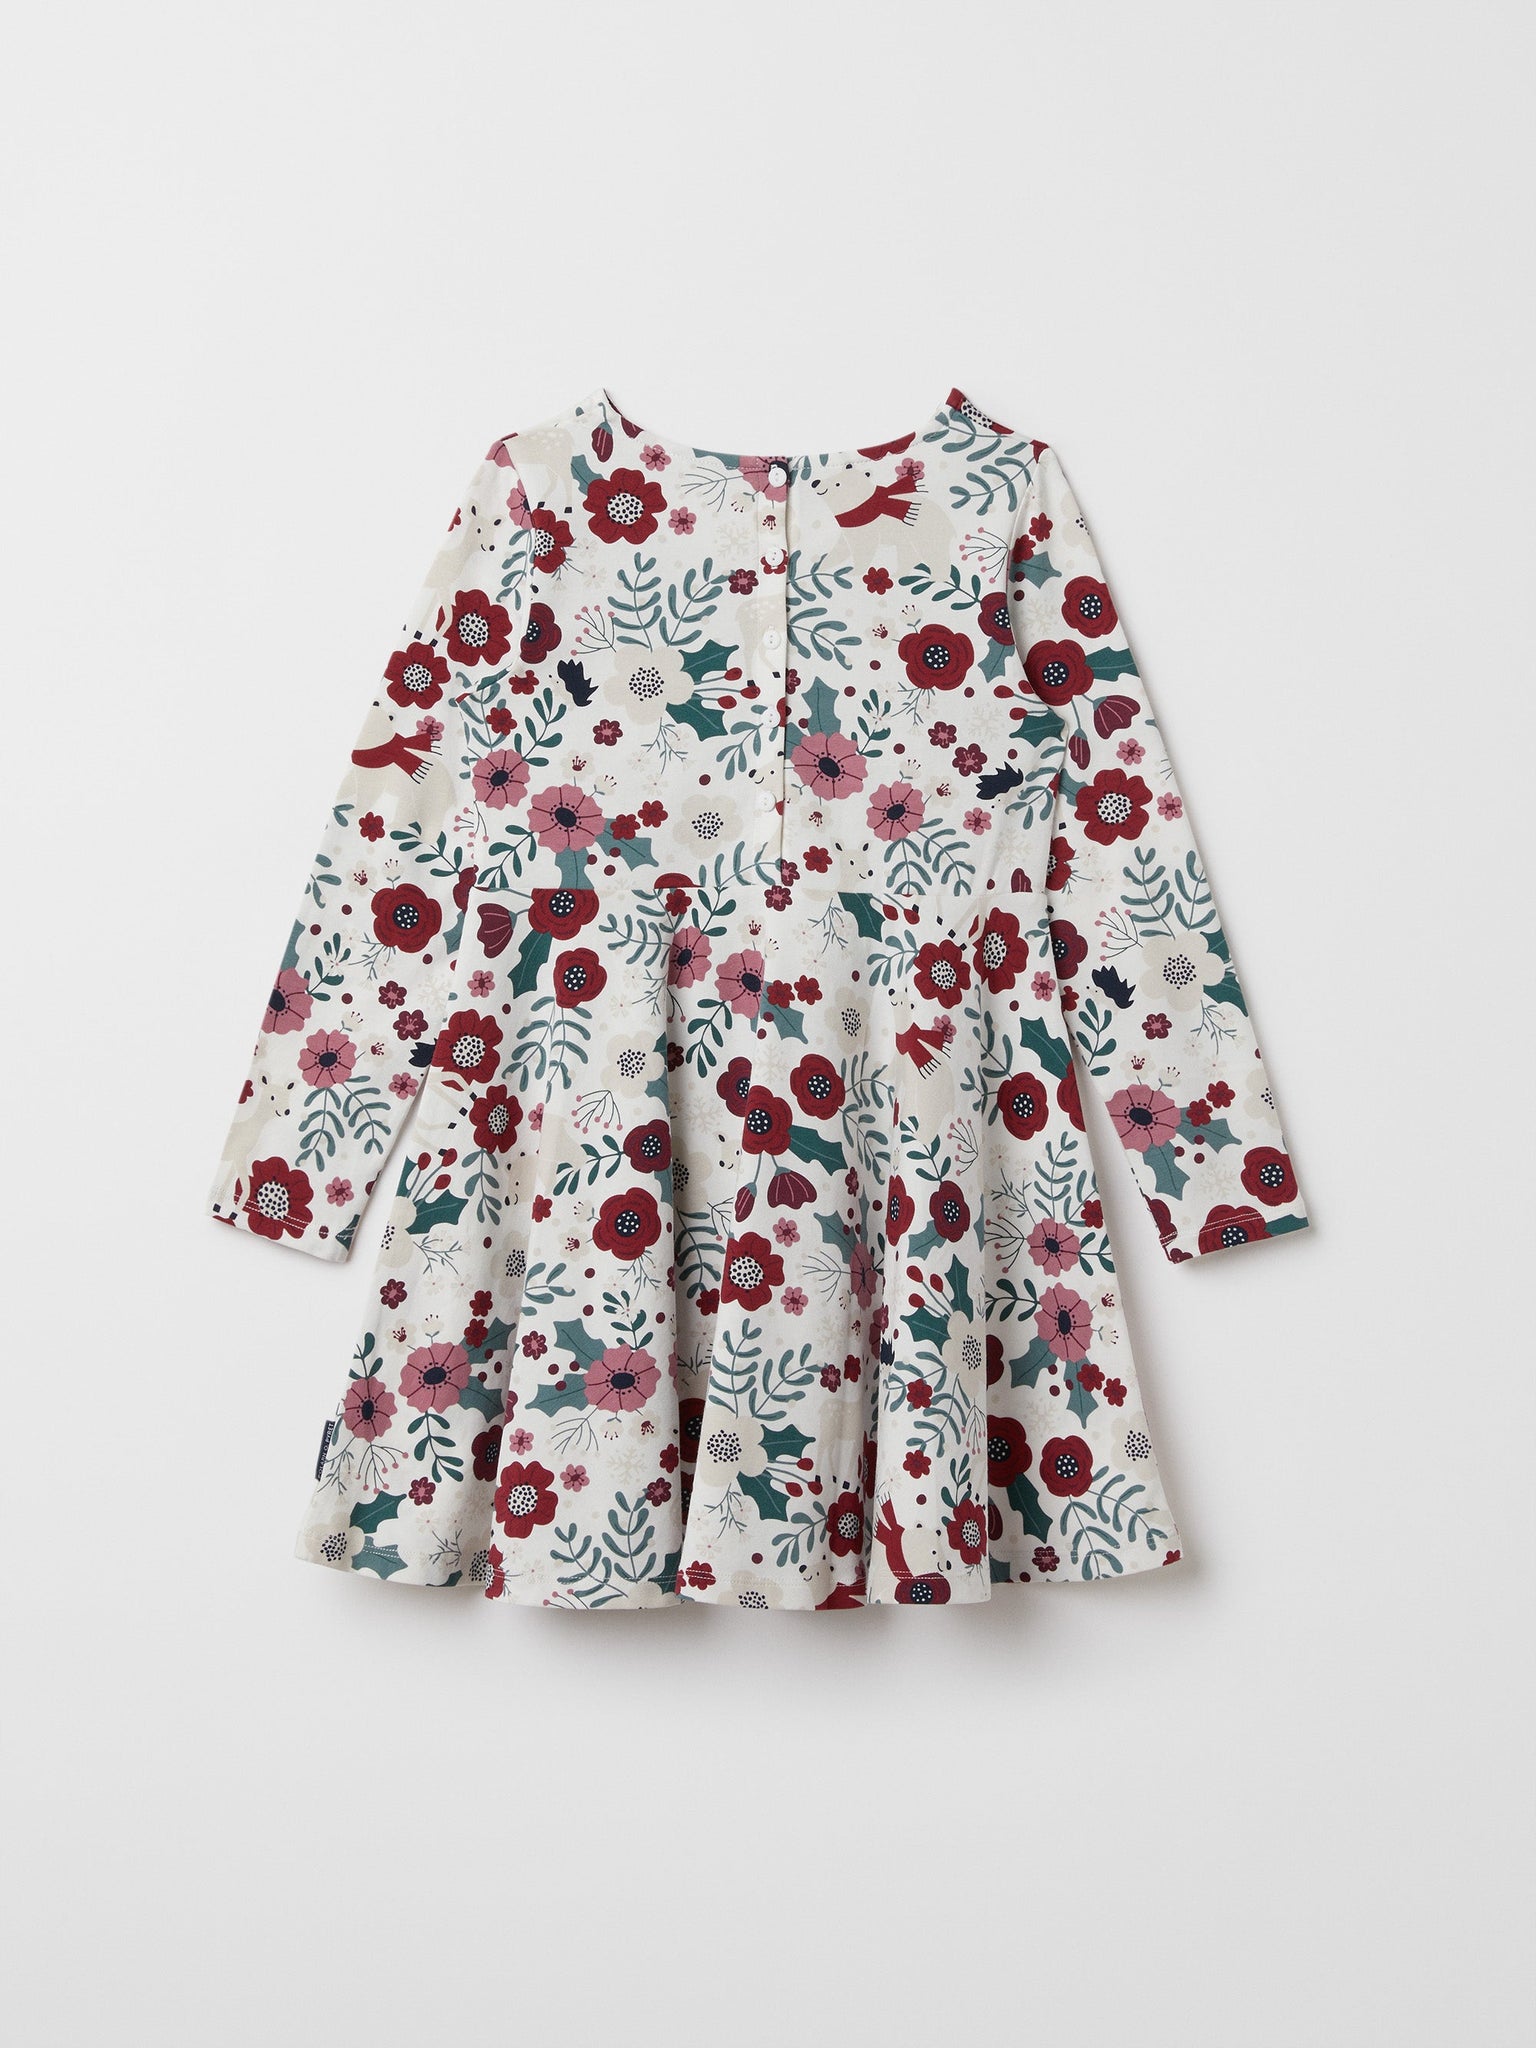 Christmas Organic Cotton Kids Dress from the Polarn O. Pyret kidswear collection. The best ethical kids clothes